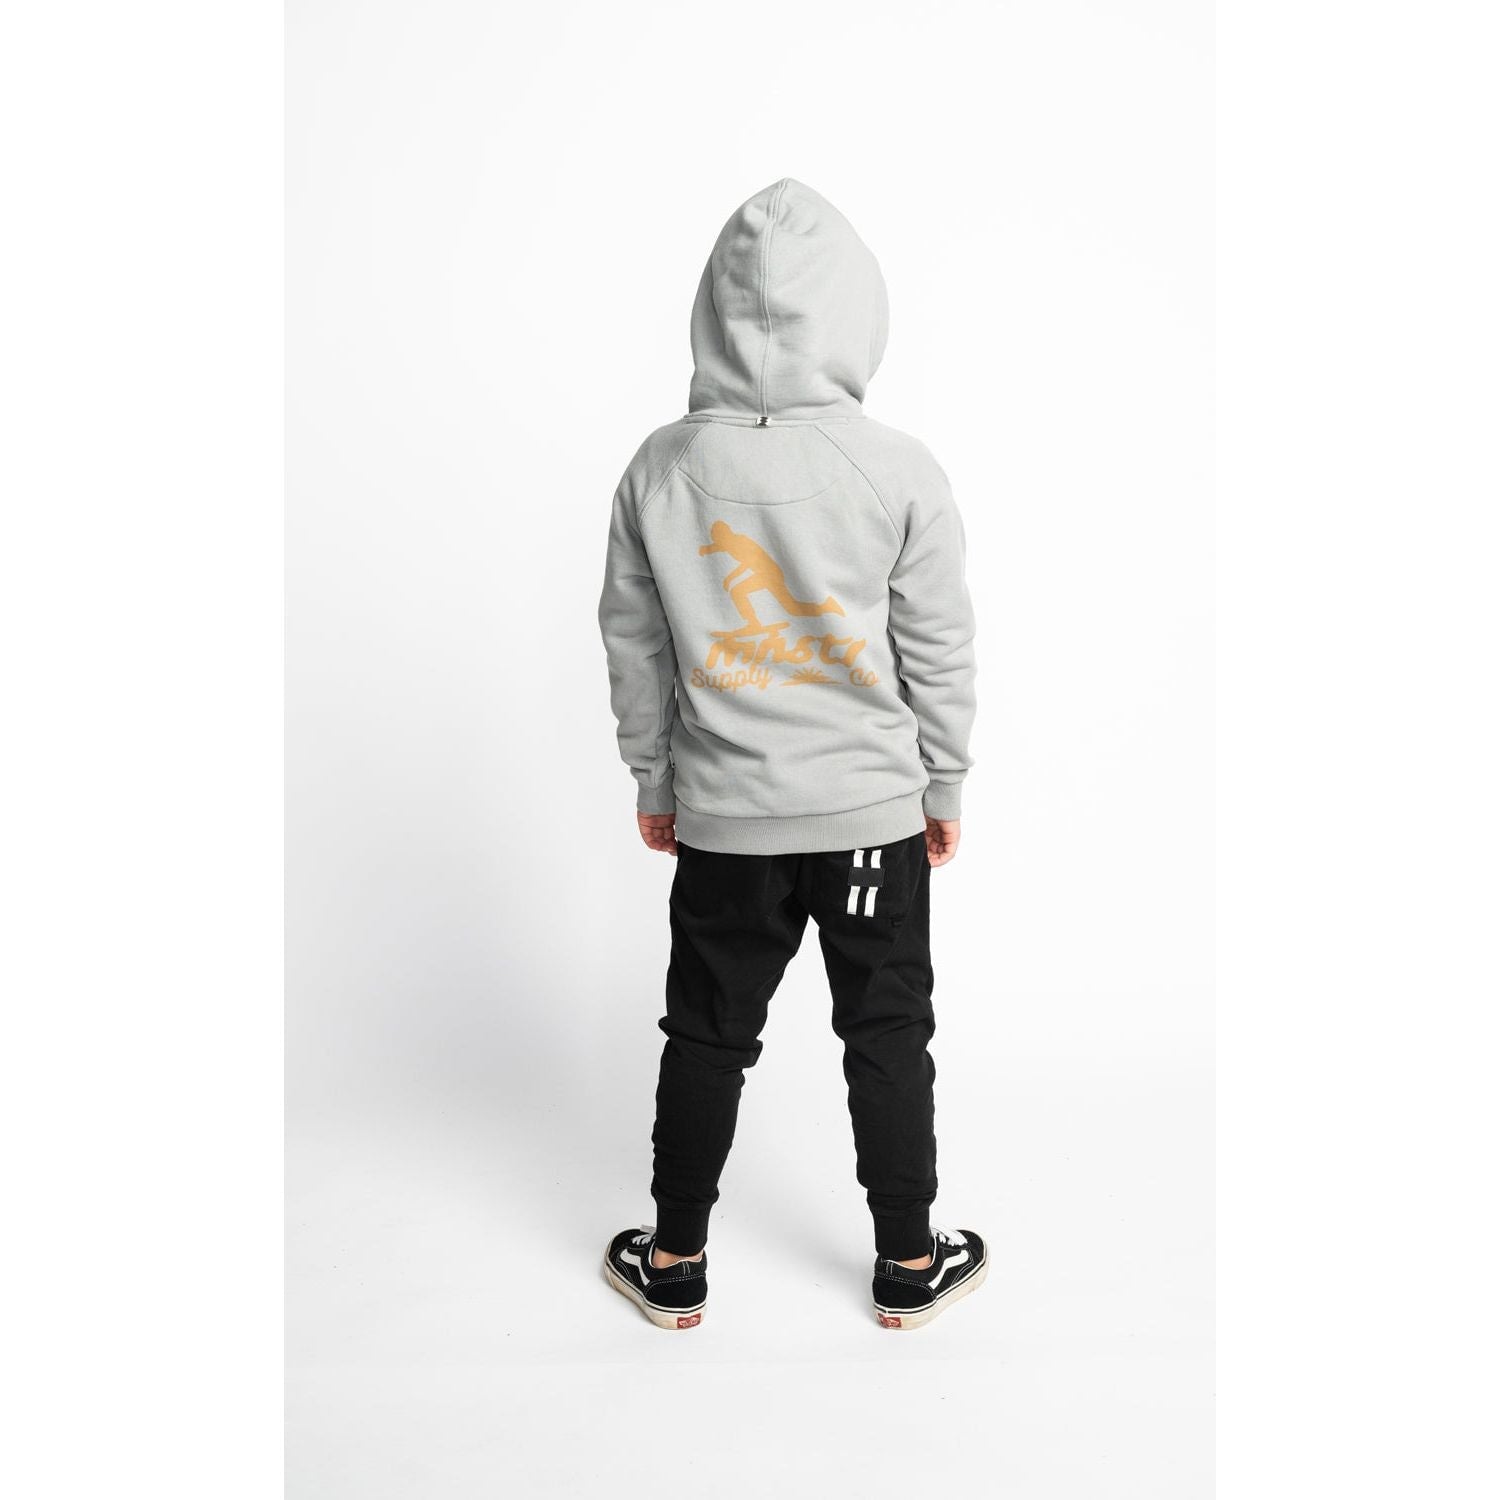 Chest High Hoody - Washed Charcoal